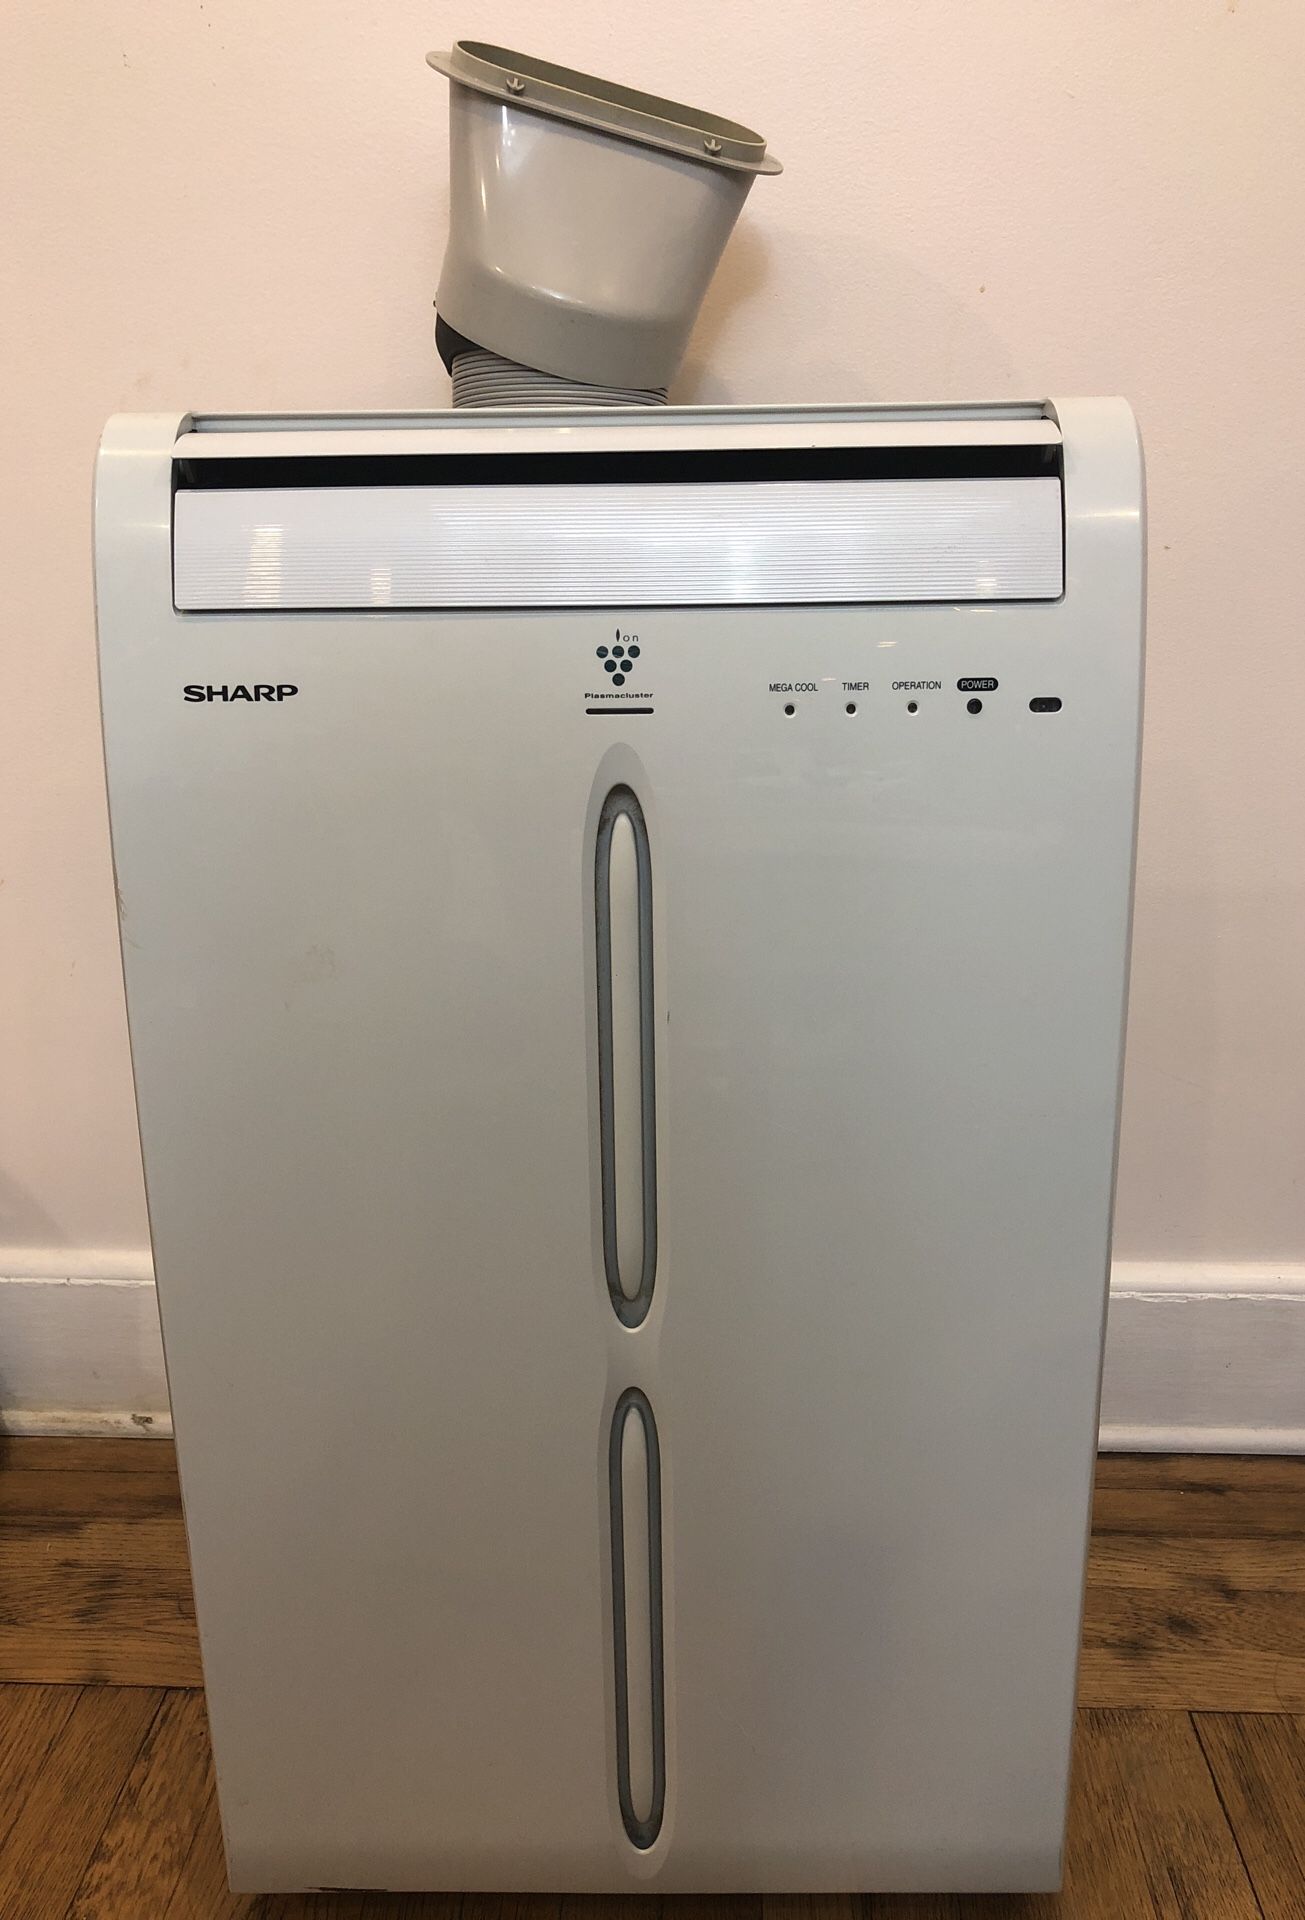 Like new, fully functional AC and dehumidifier 2-in-1